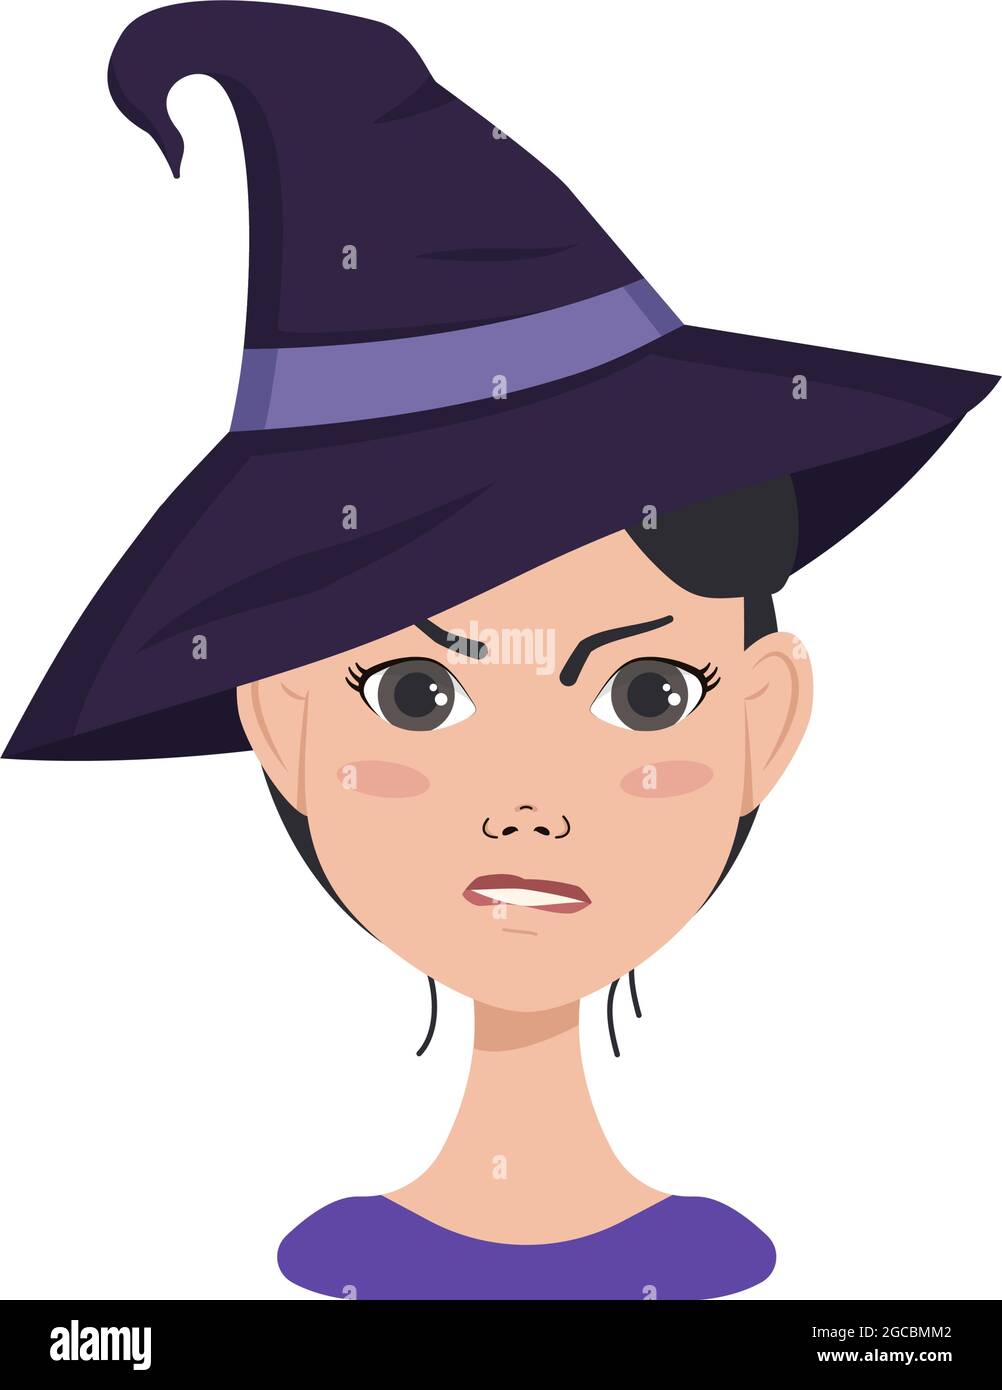 Avatar of asian woman with dark hair, angry emotions, furious face and pursed lips, wearing a witch hat. Halloween character in costume Stock Vector